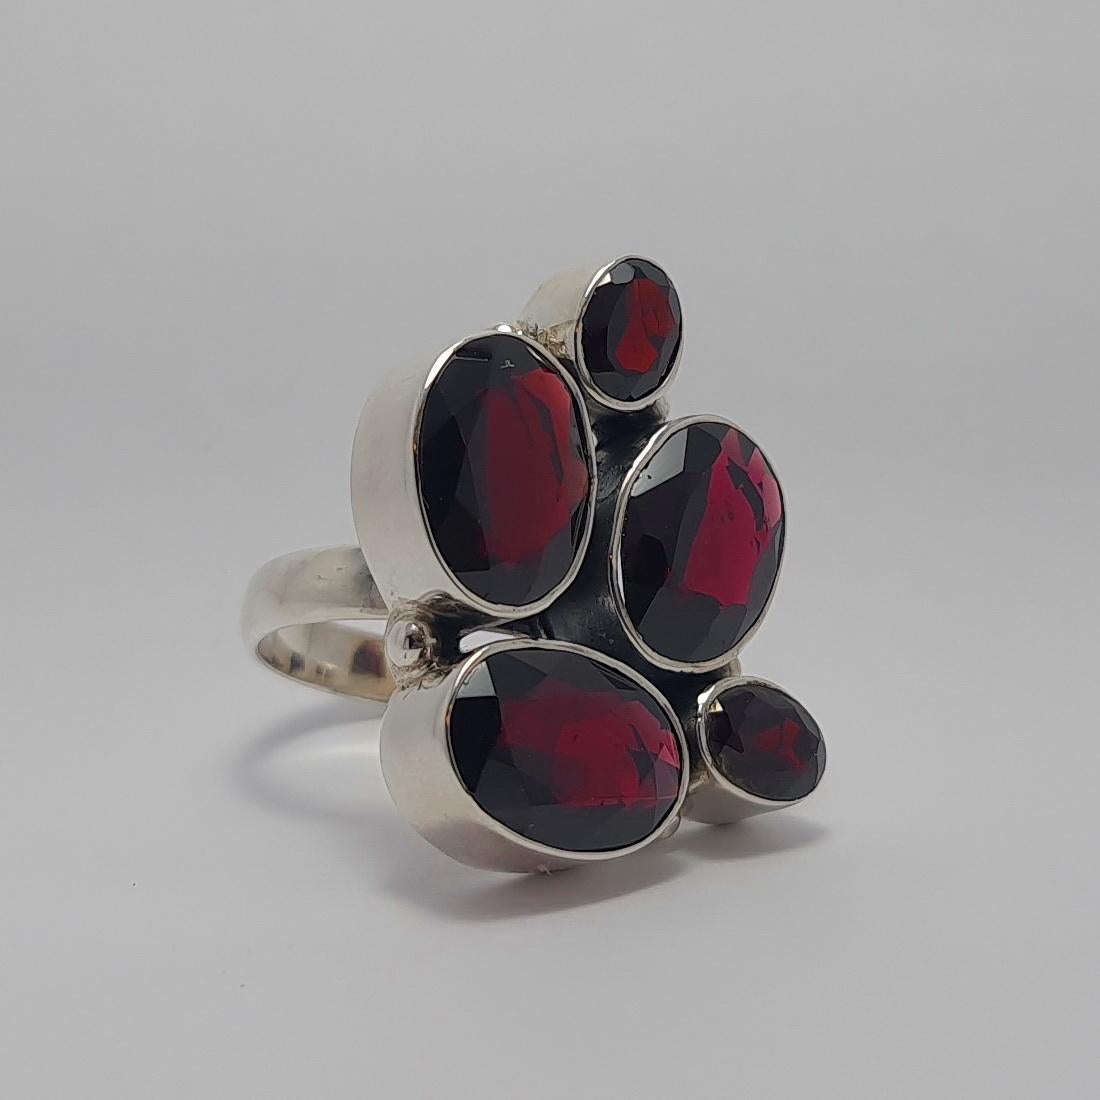 925 Sterling Silver Ring with large natural Garnet Gemstones
The ring size is 8 3/4 US

The size of the Large Oval shape Garnet stones is 10x14 mm.
The size of the Small Oval shape Garnet stones is 6x8 mm.
The Total weight of Garnet gemstones is 21